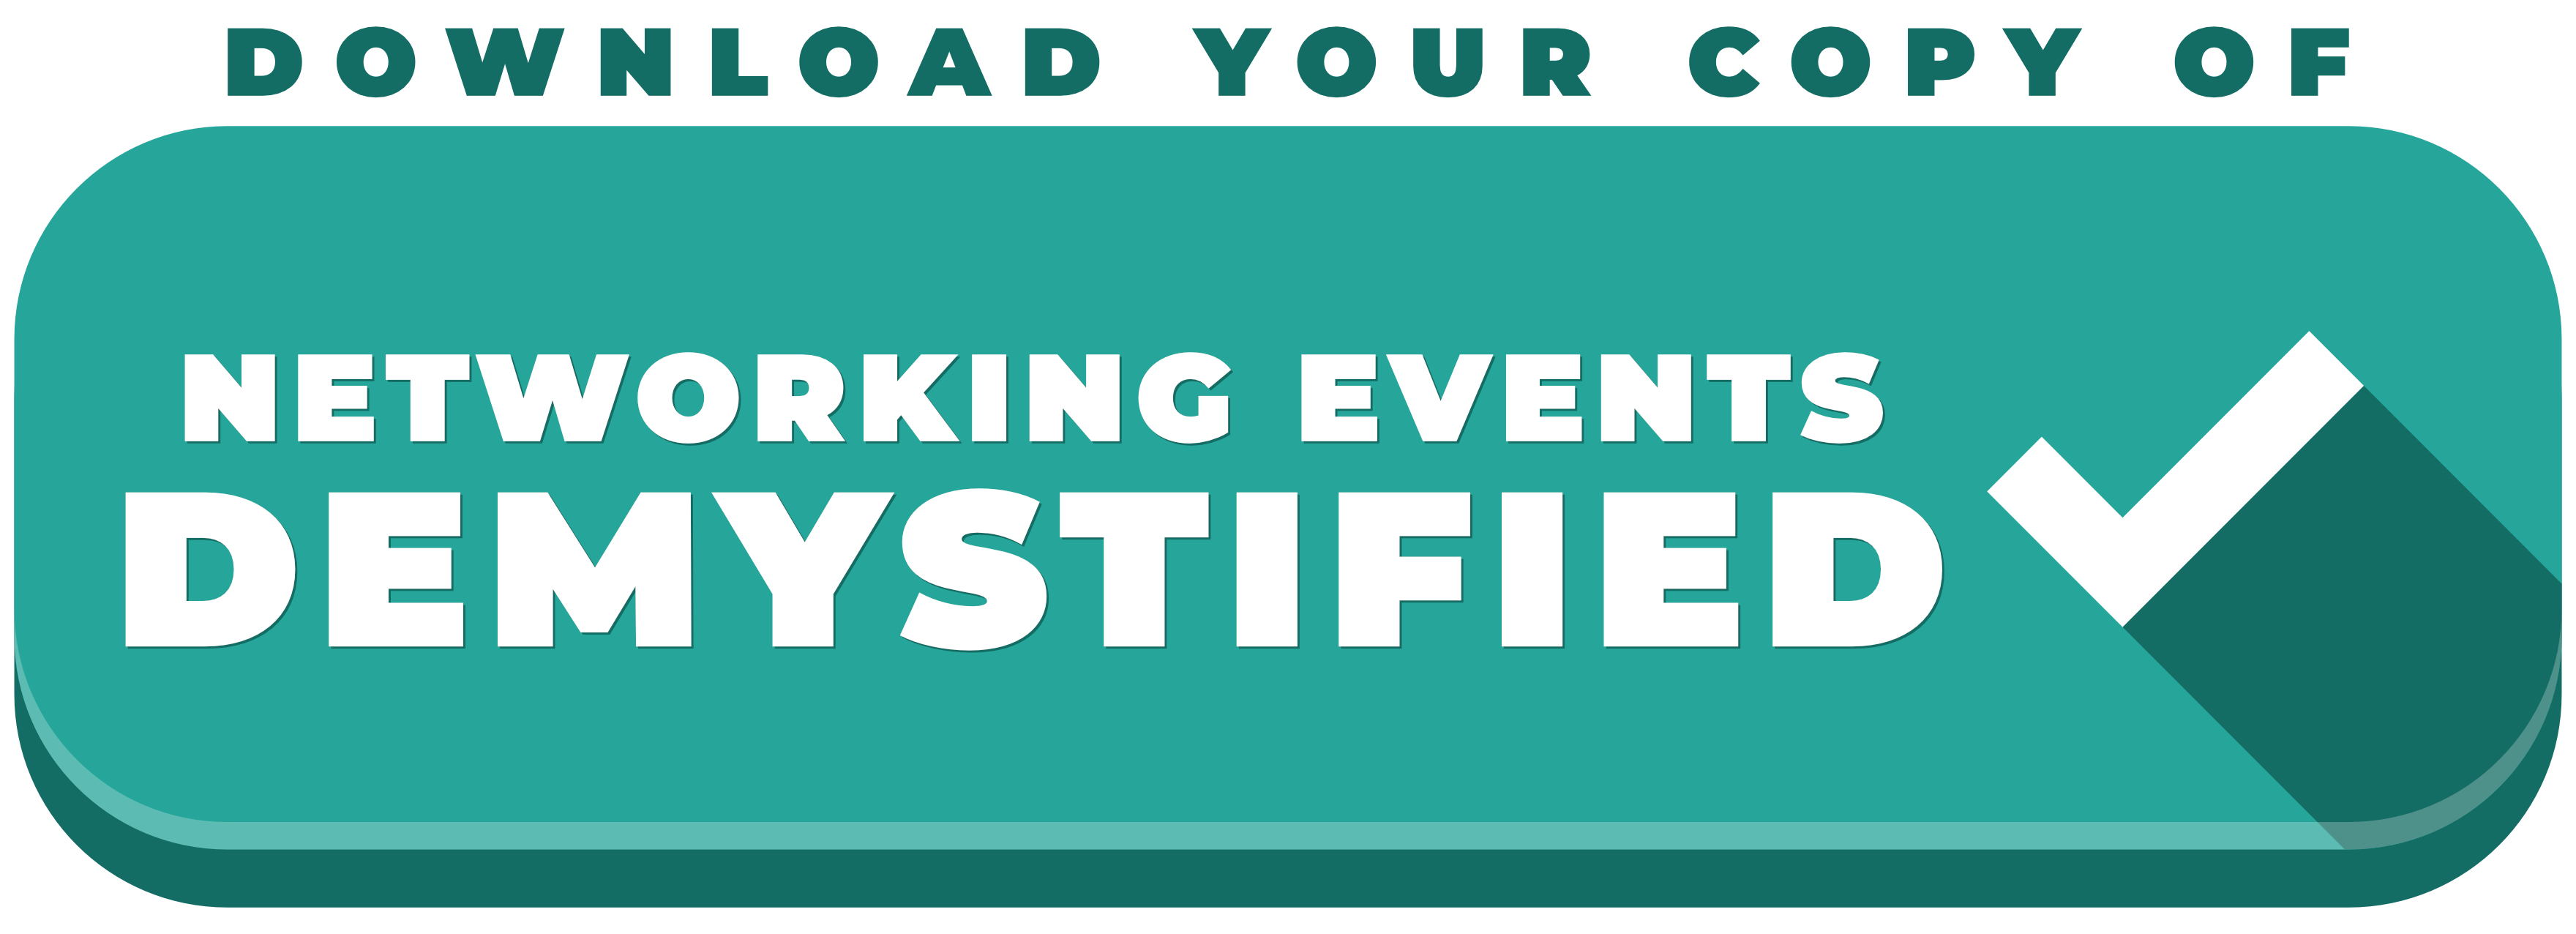 Networking Events Demystified green call to action button with white checkmark